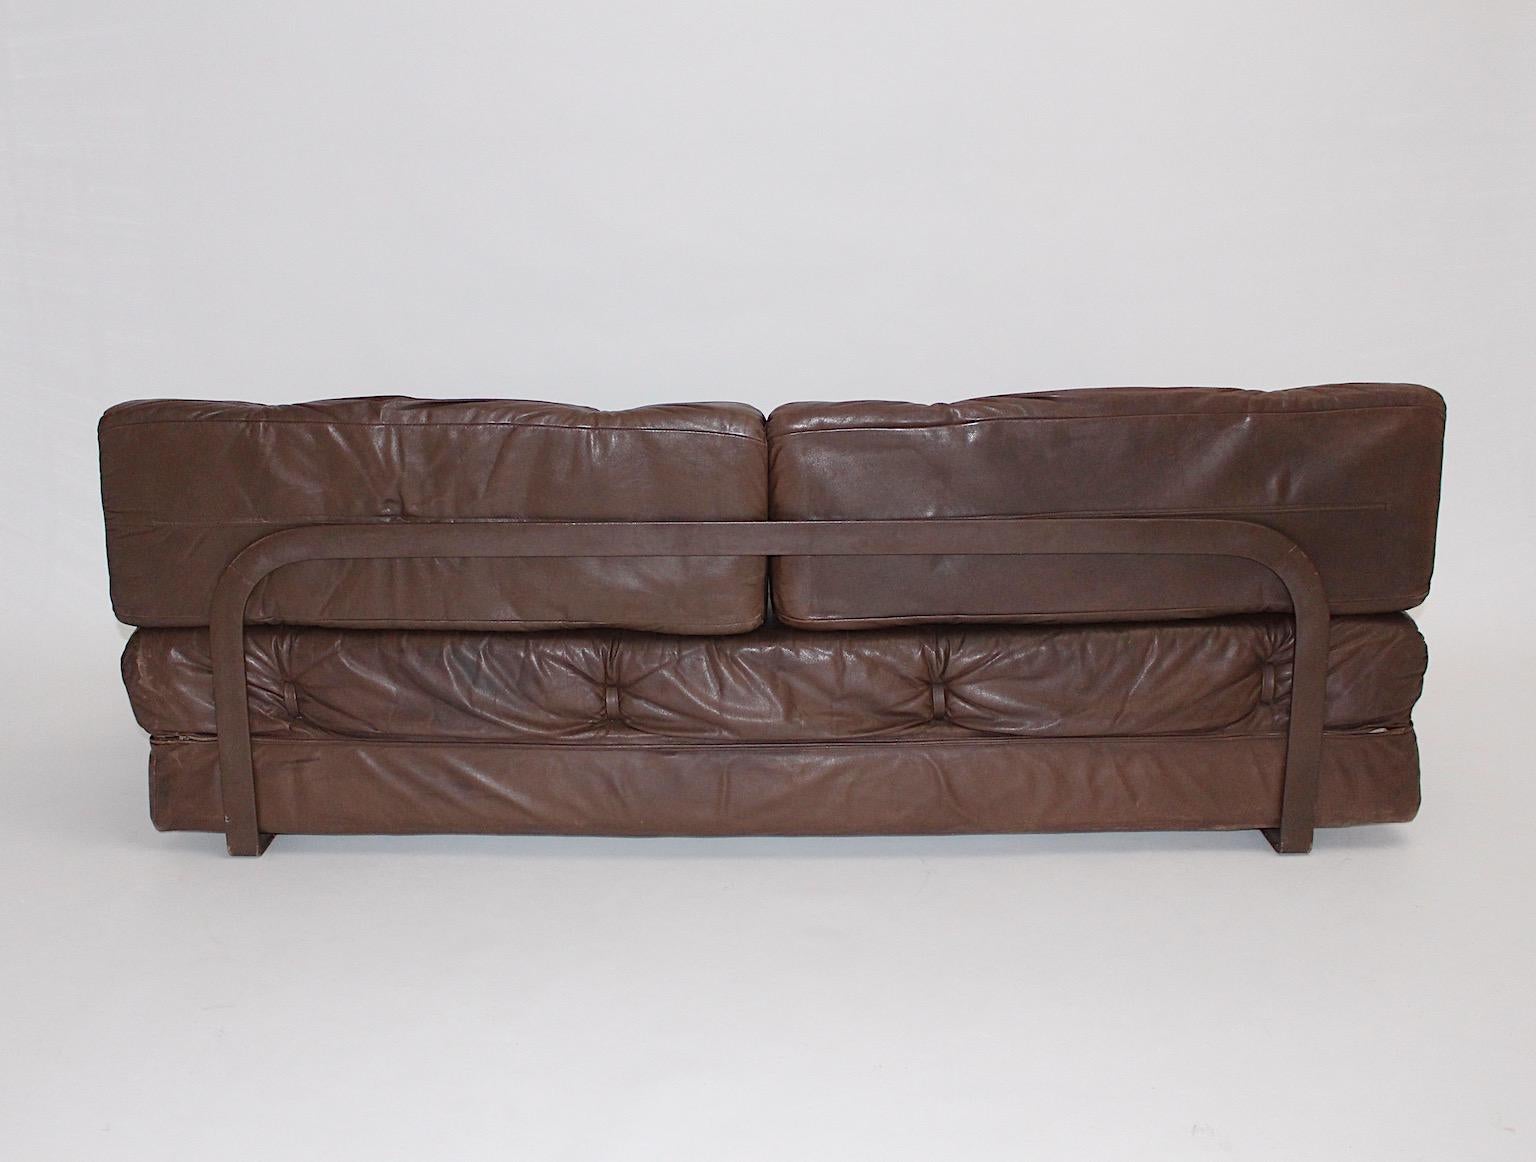 Wittmann Leather Brown Vintage Sofa or Daybed Atrium De Sede Style 1970s Austria For Sale 2